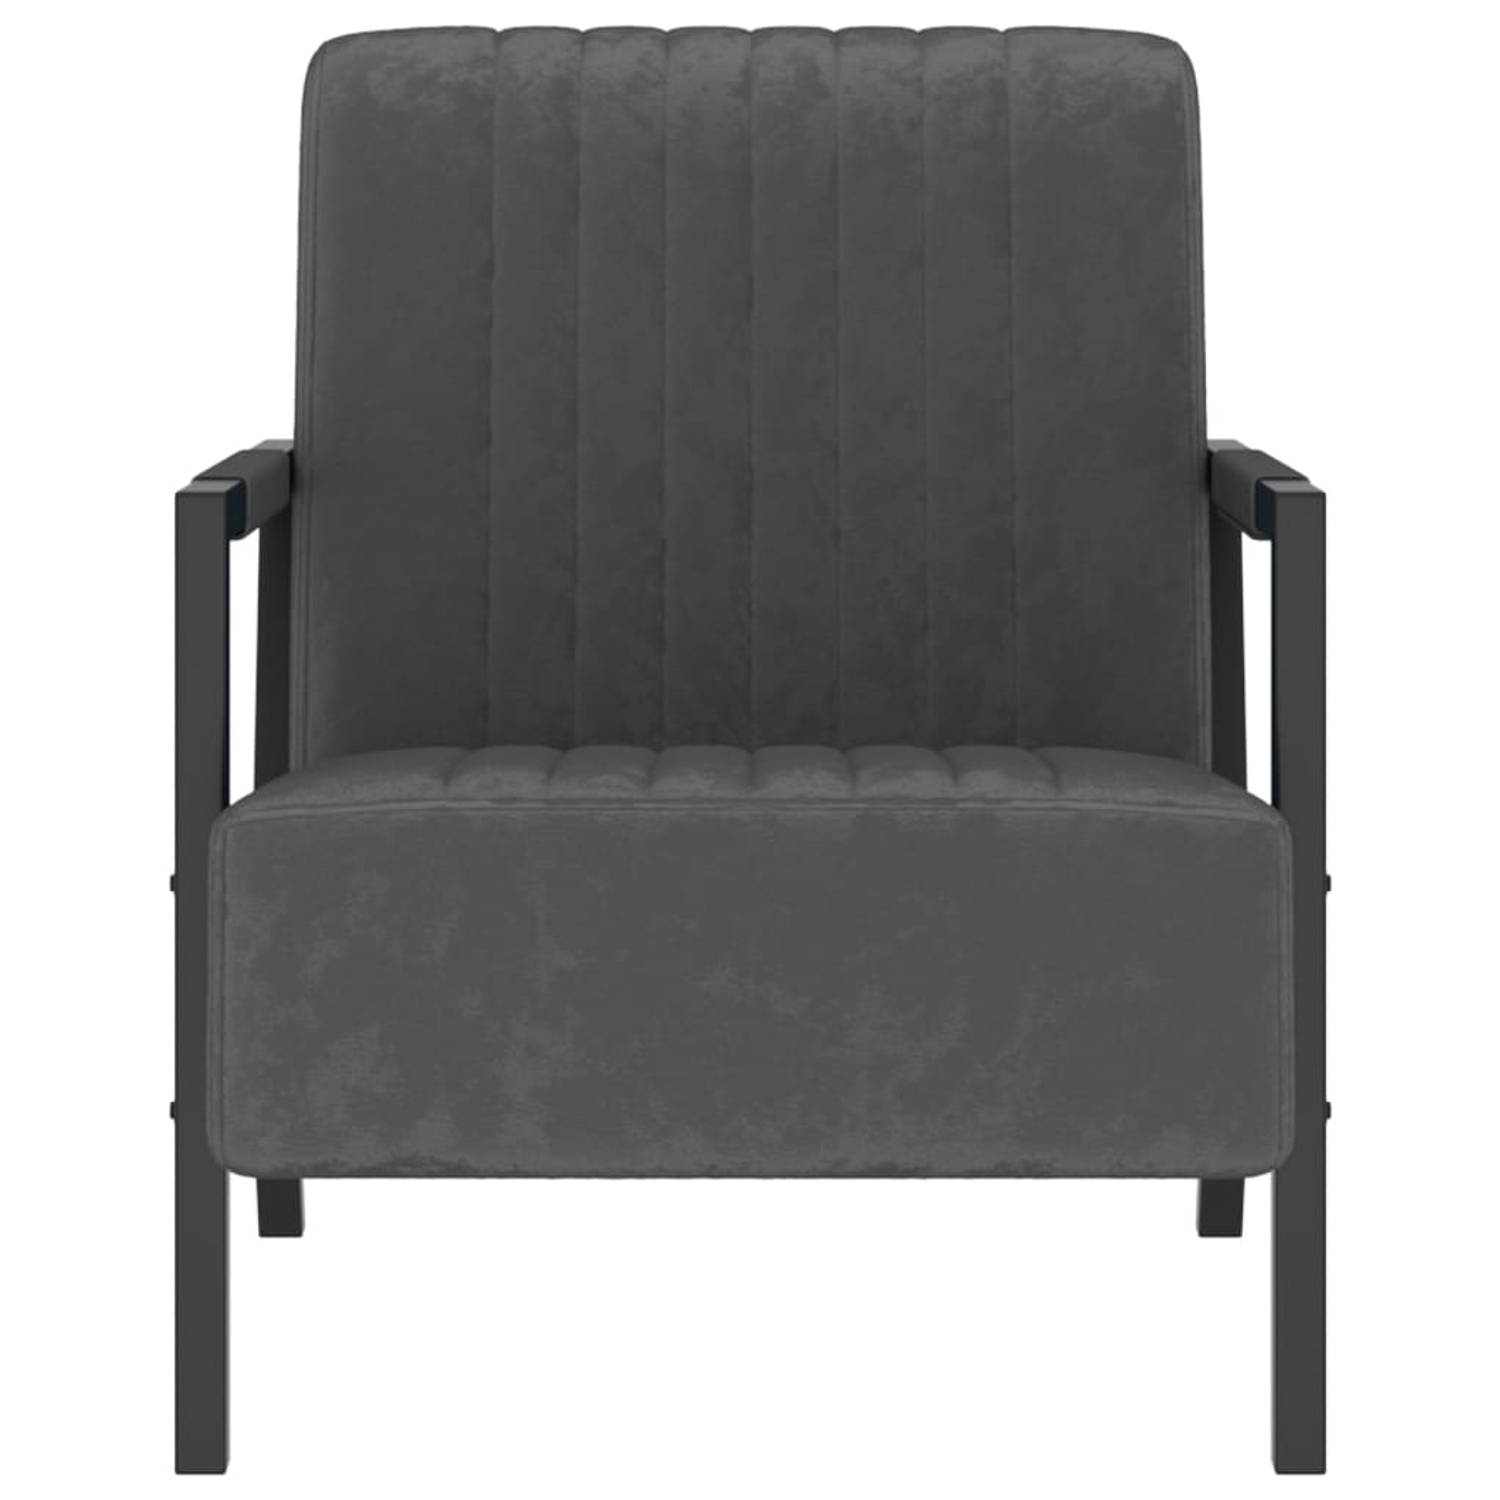 The Living Store Fauteuil fluweel donkergrijs - Fauteuil